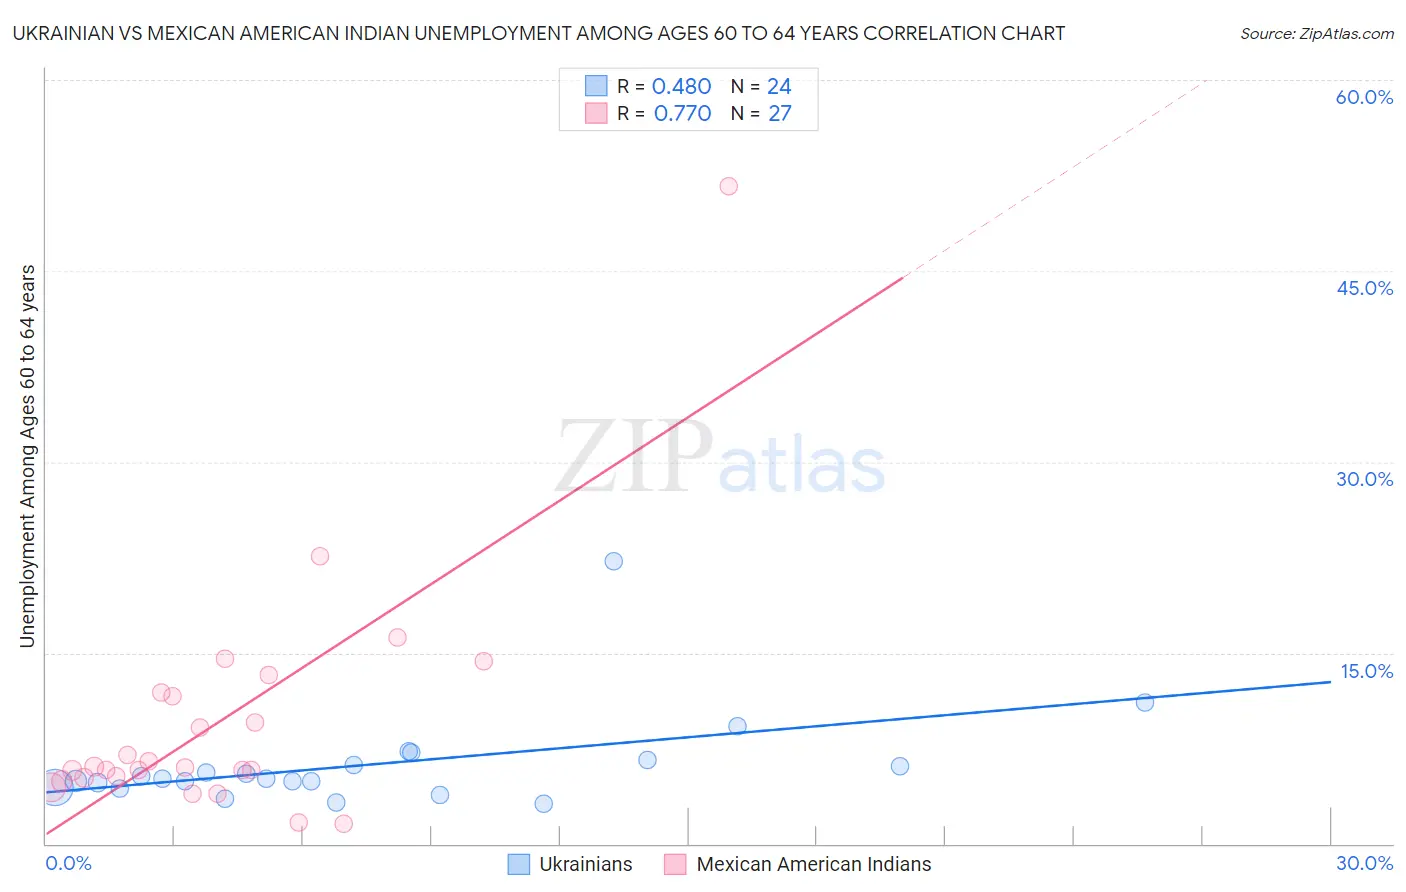 Ukrainian vs Mexican American Indian Unemployment Among Ages 60 to 64 years